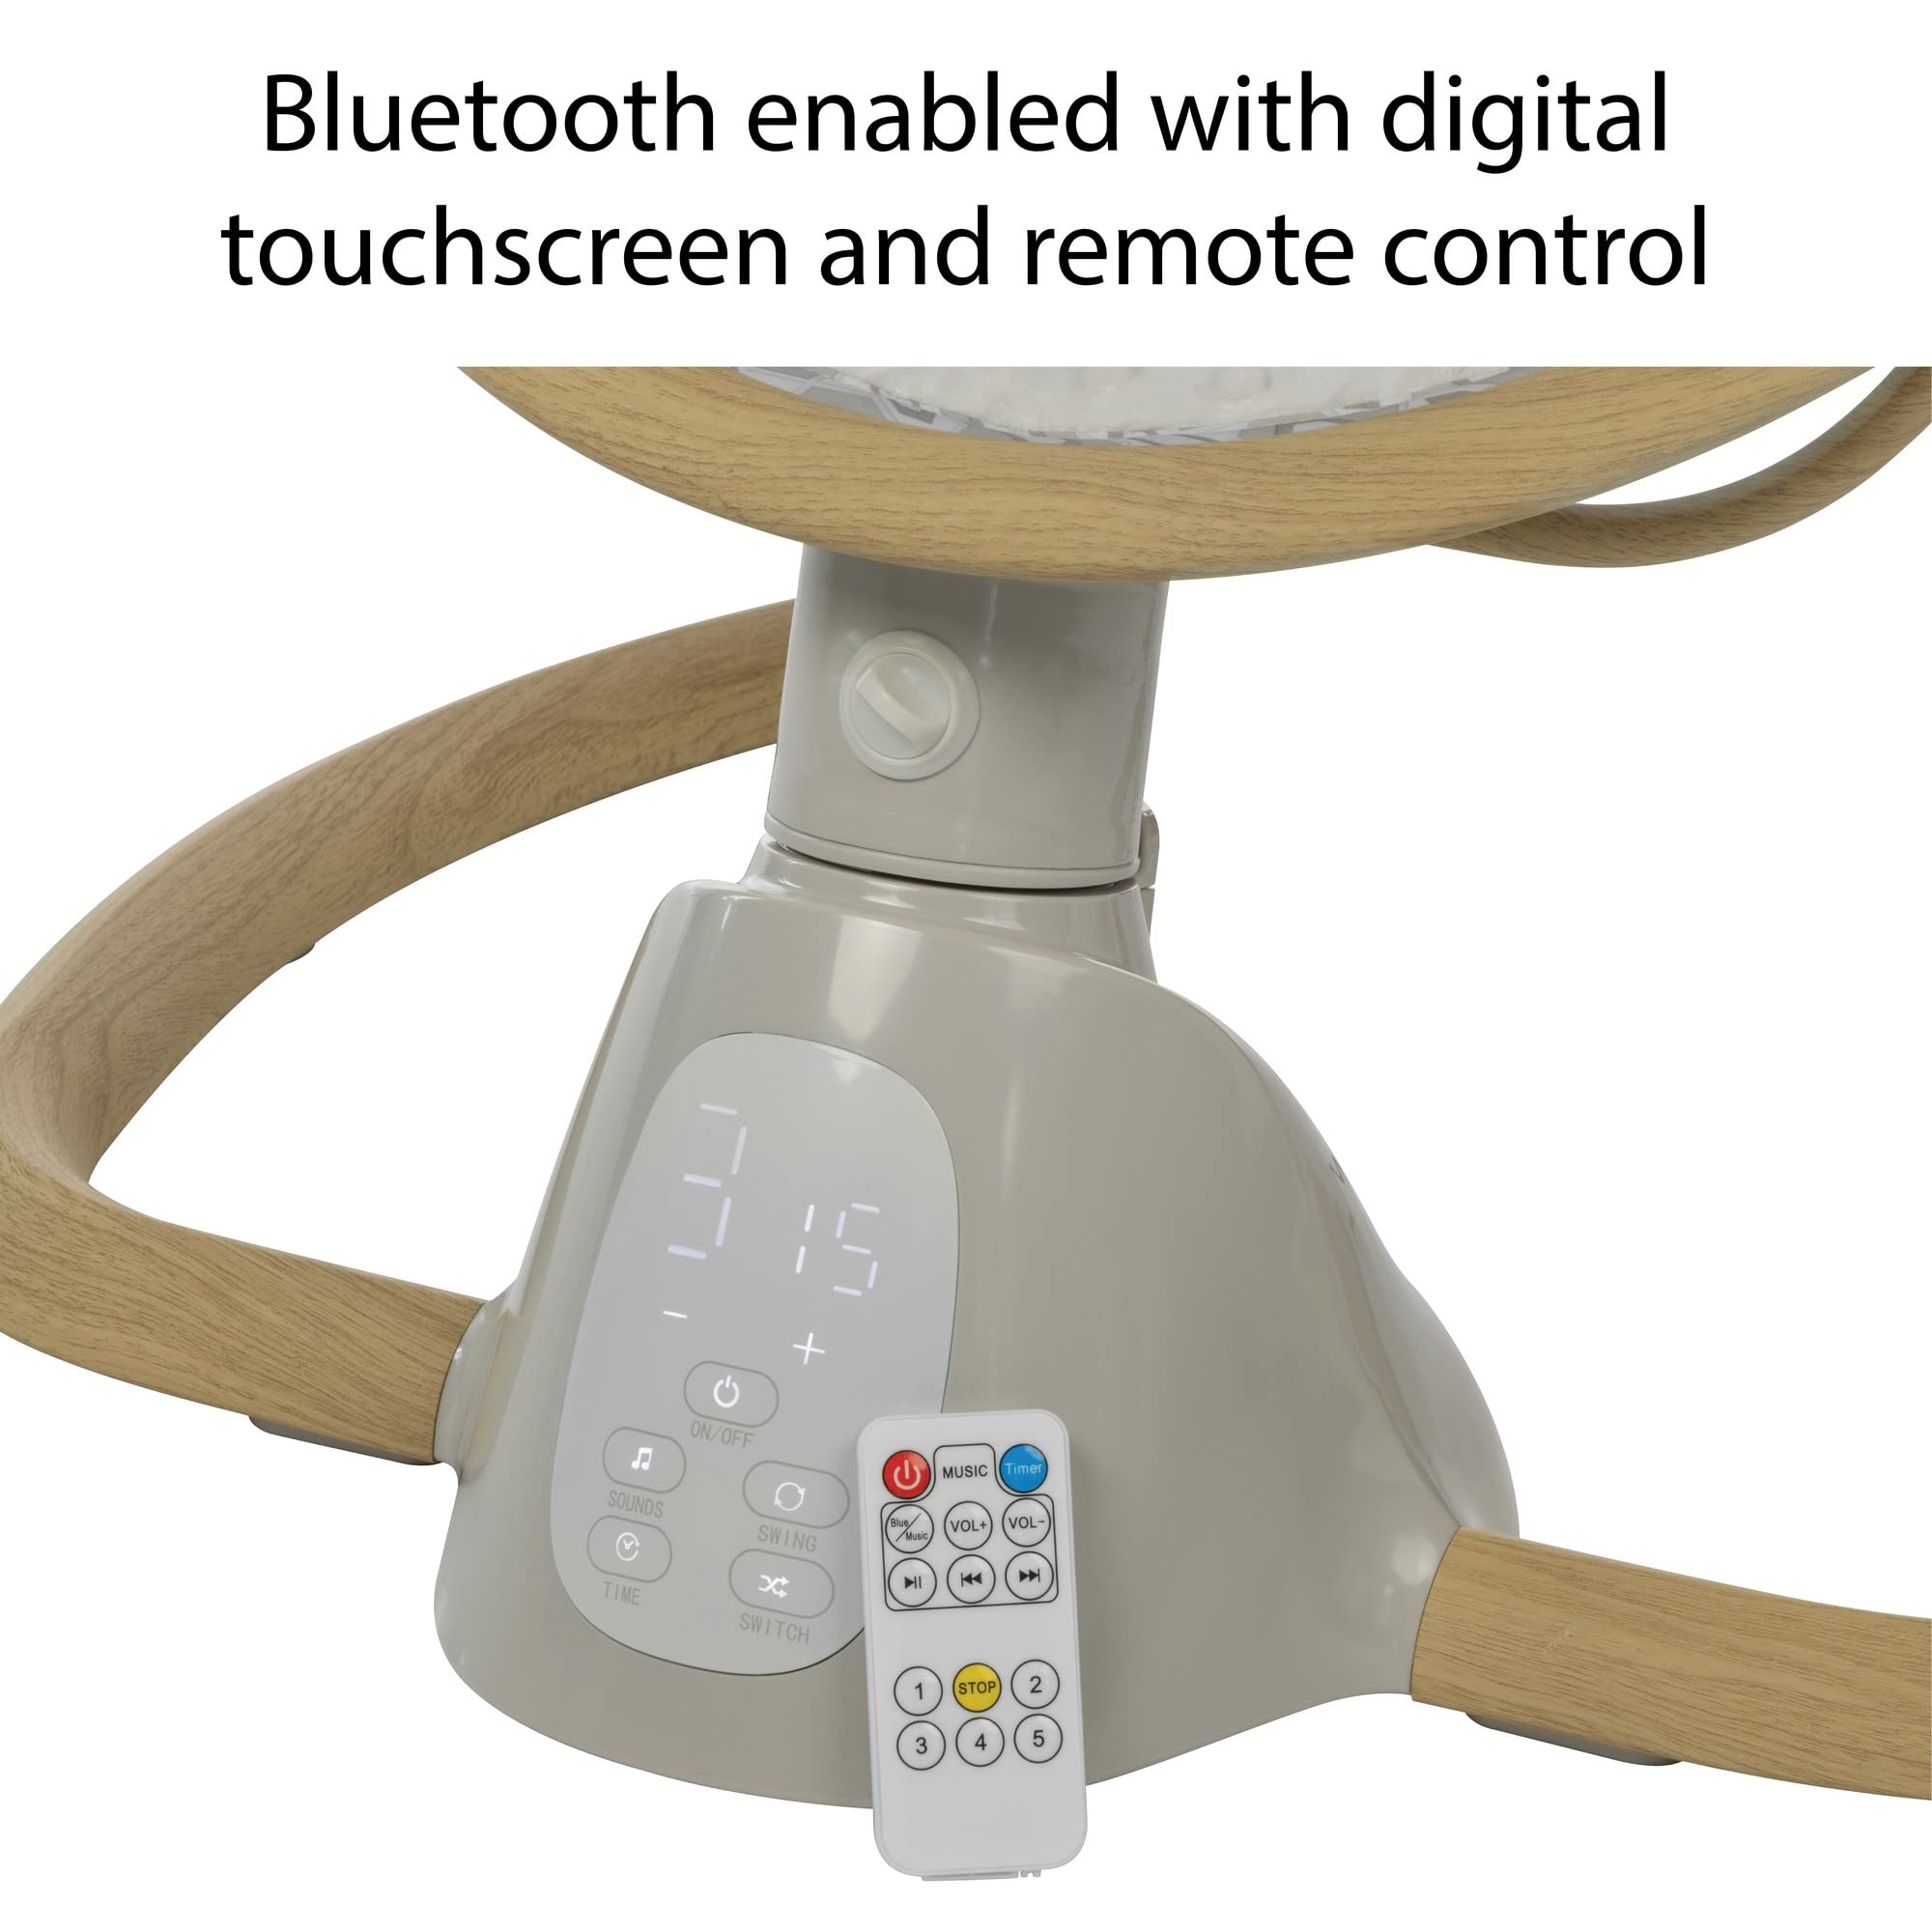 Safety 1st 5 Modes Bluetooth Swing, Bluetooth Enabled with Digital Touch Screen and Remote Control, High Street